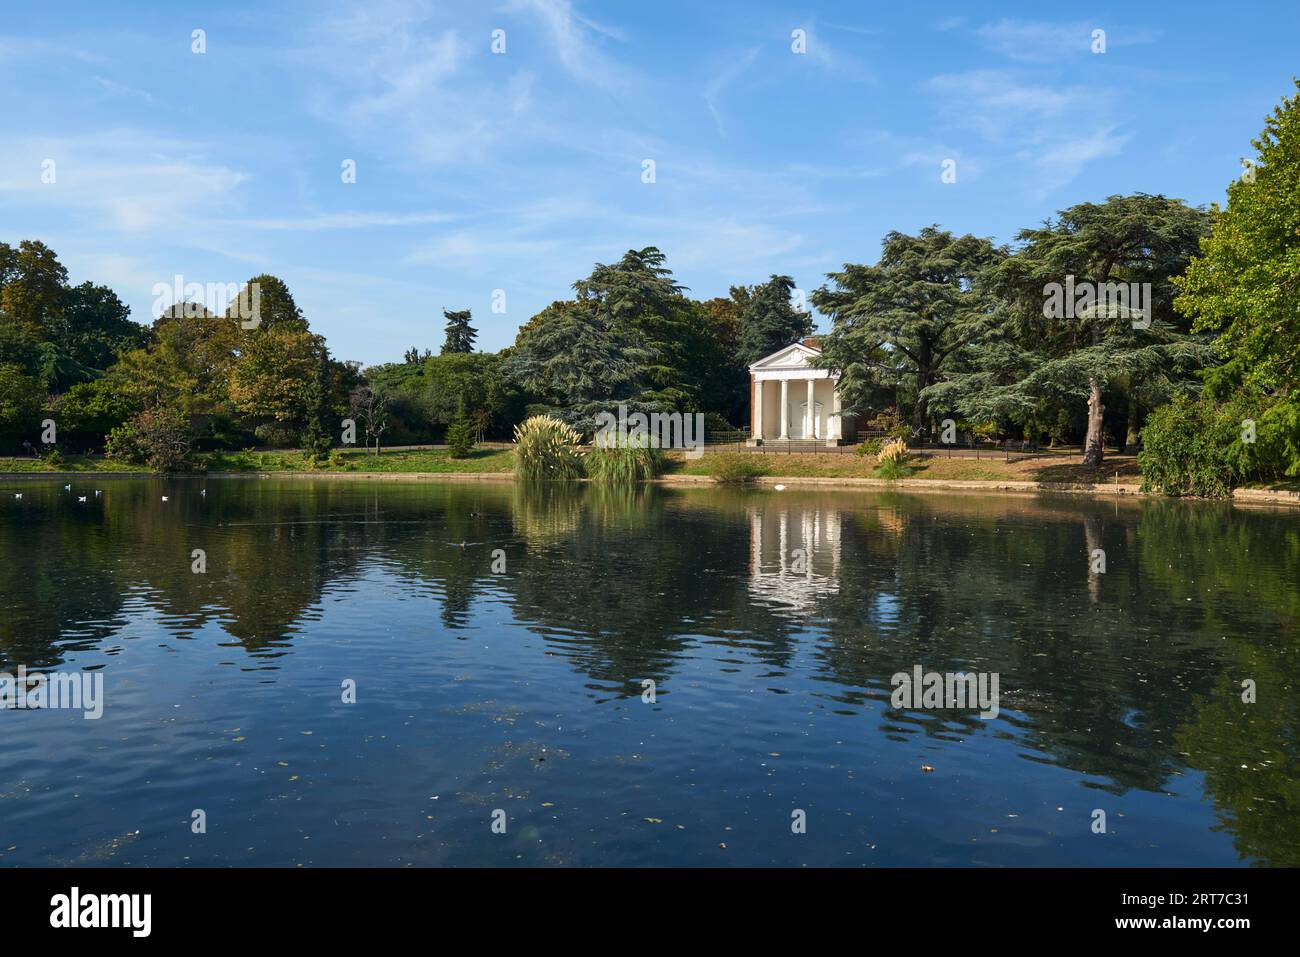 Round Pond and the 18th century Doric temple in Gunnersbury Park, West London UK, in late summer Stock Photo